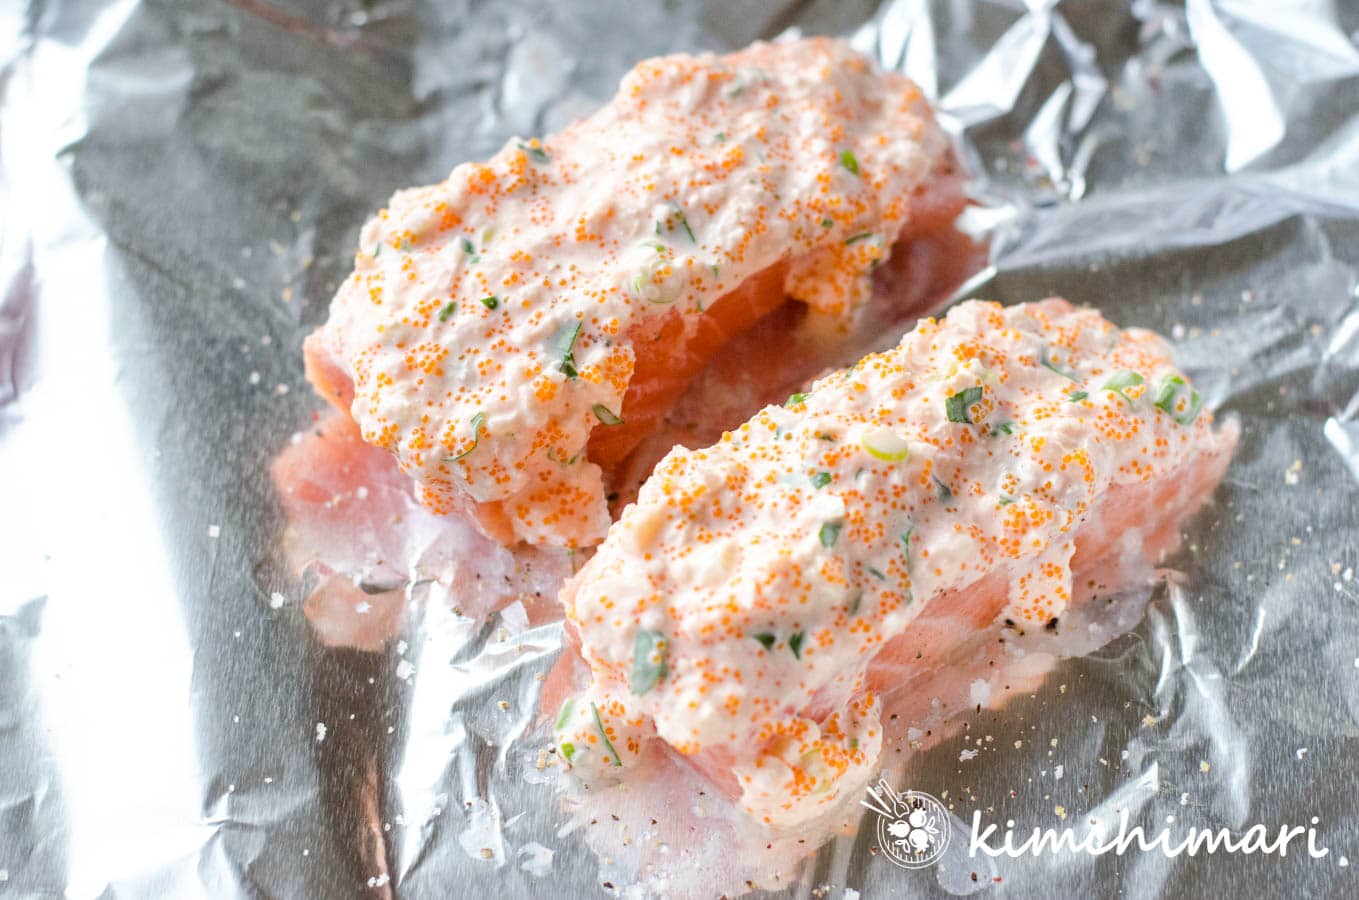 small pieces of salmon covered with sauce on tin foil